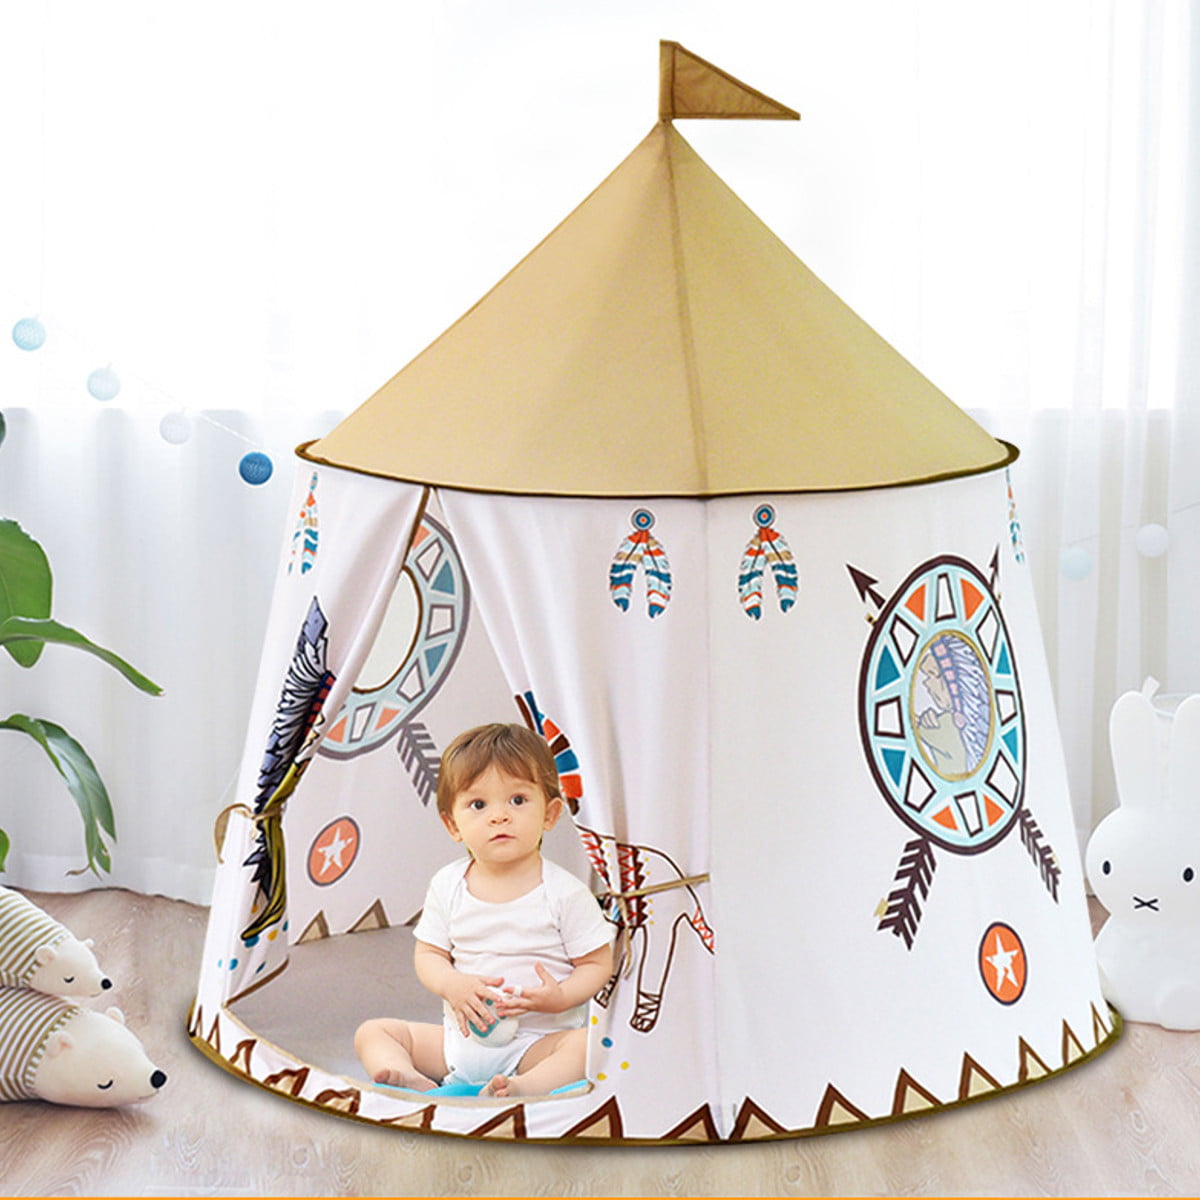 Eagle Teepee Indian Tribe Tent Canvas Finish Kids Indoor/Outdoor Playhouse